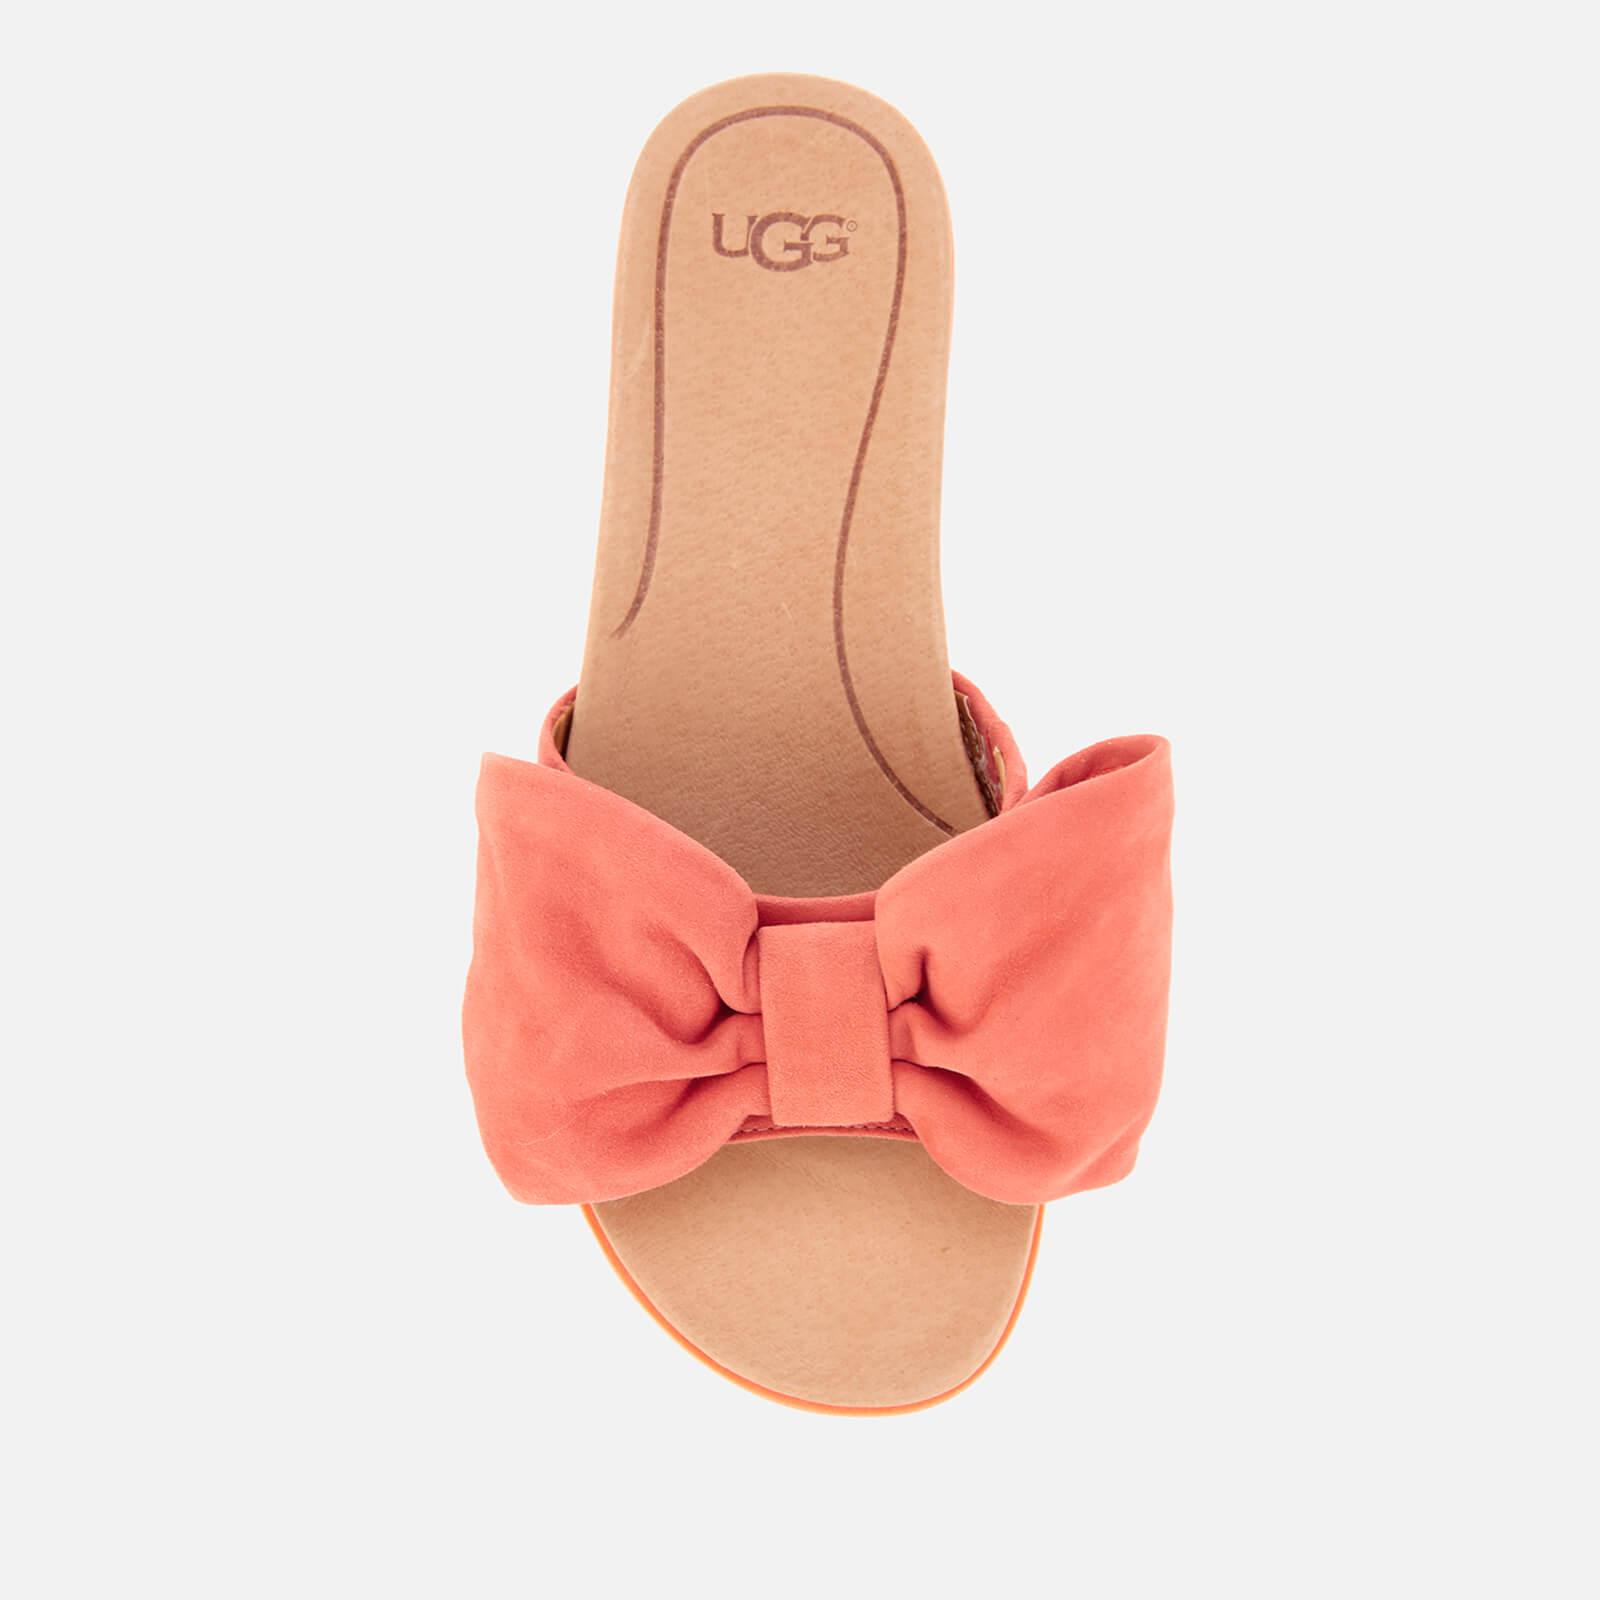 ugg sandals with bow